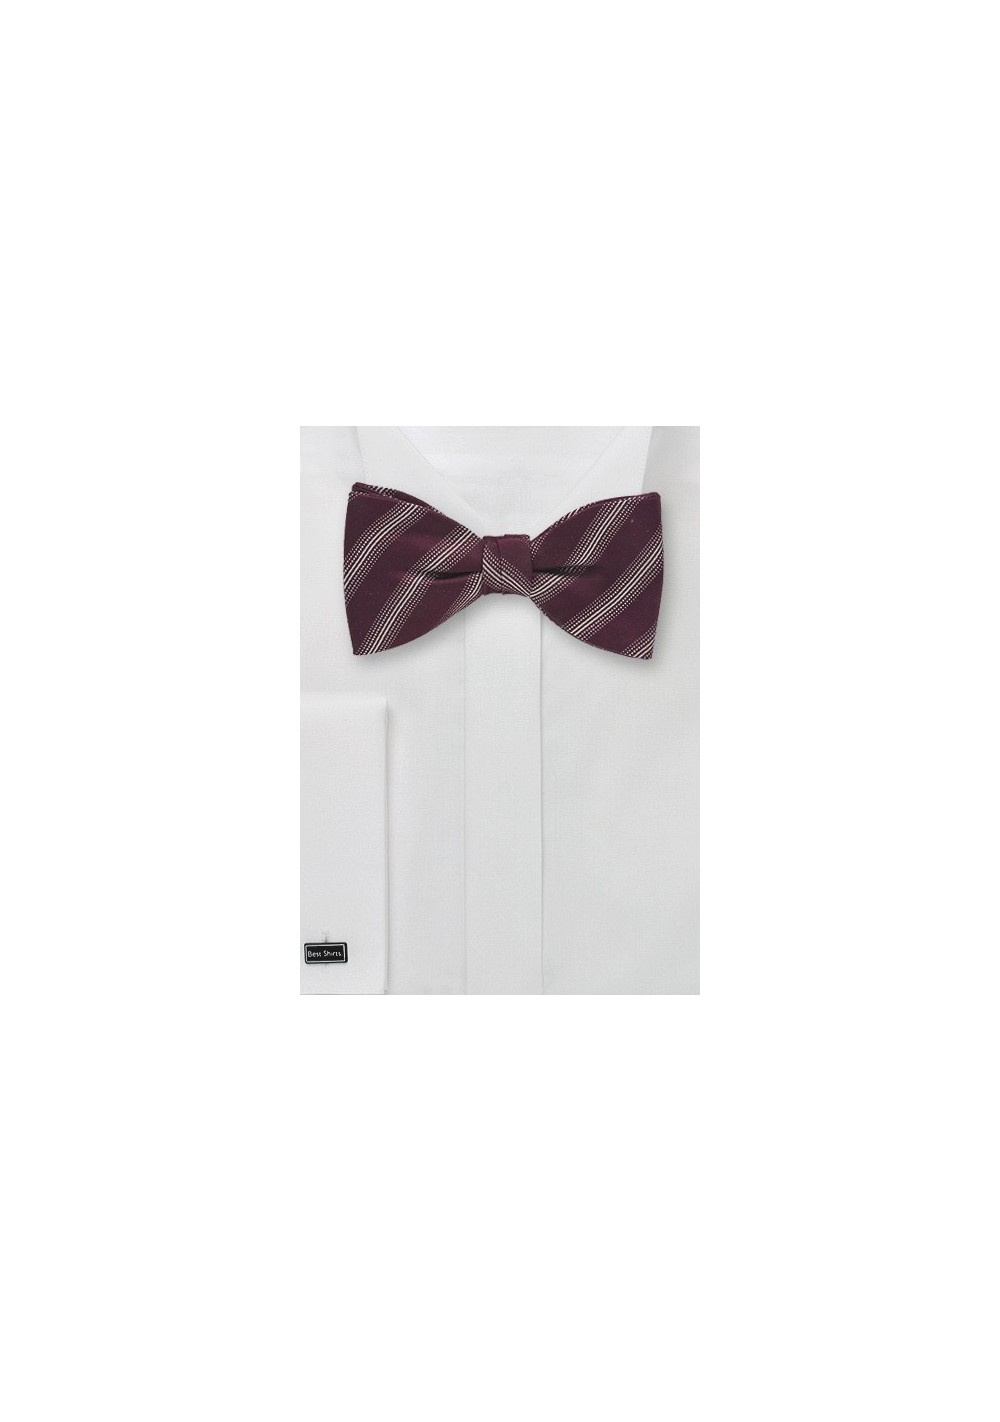 Burgundy and Silver Striped Bow Tie